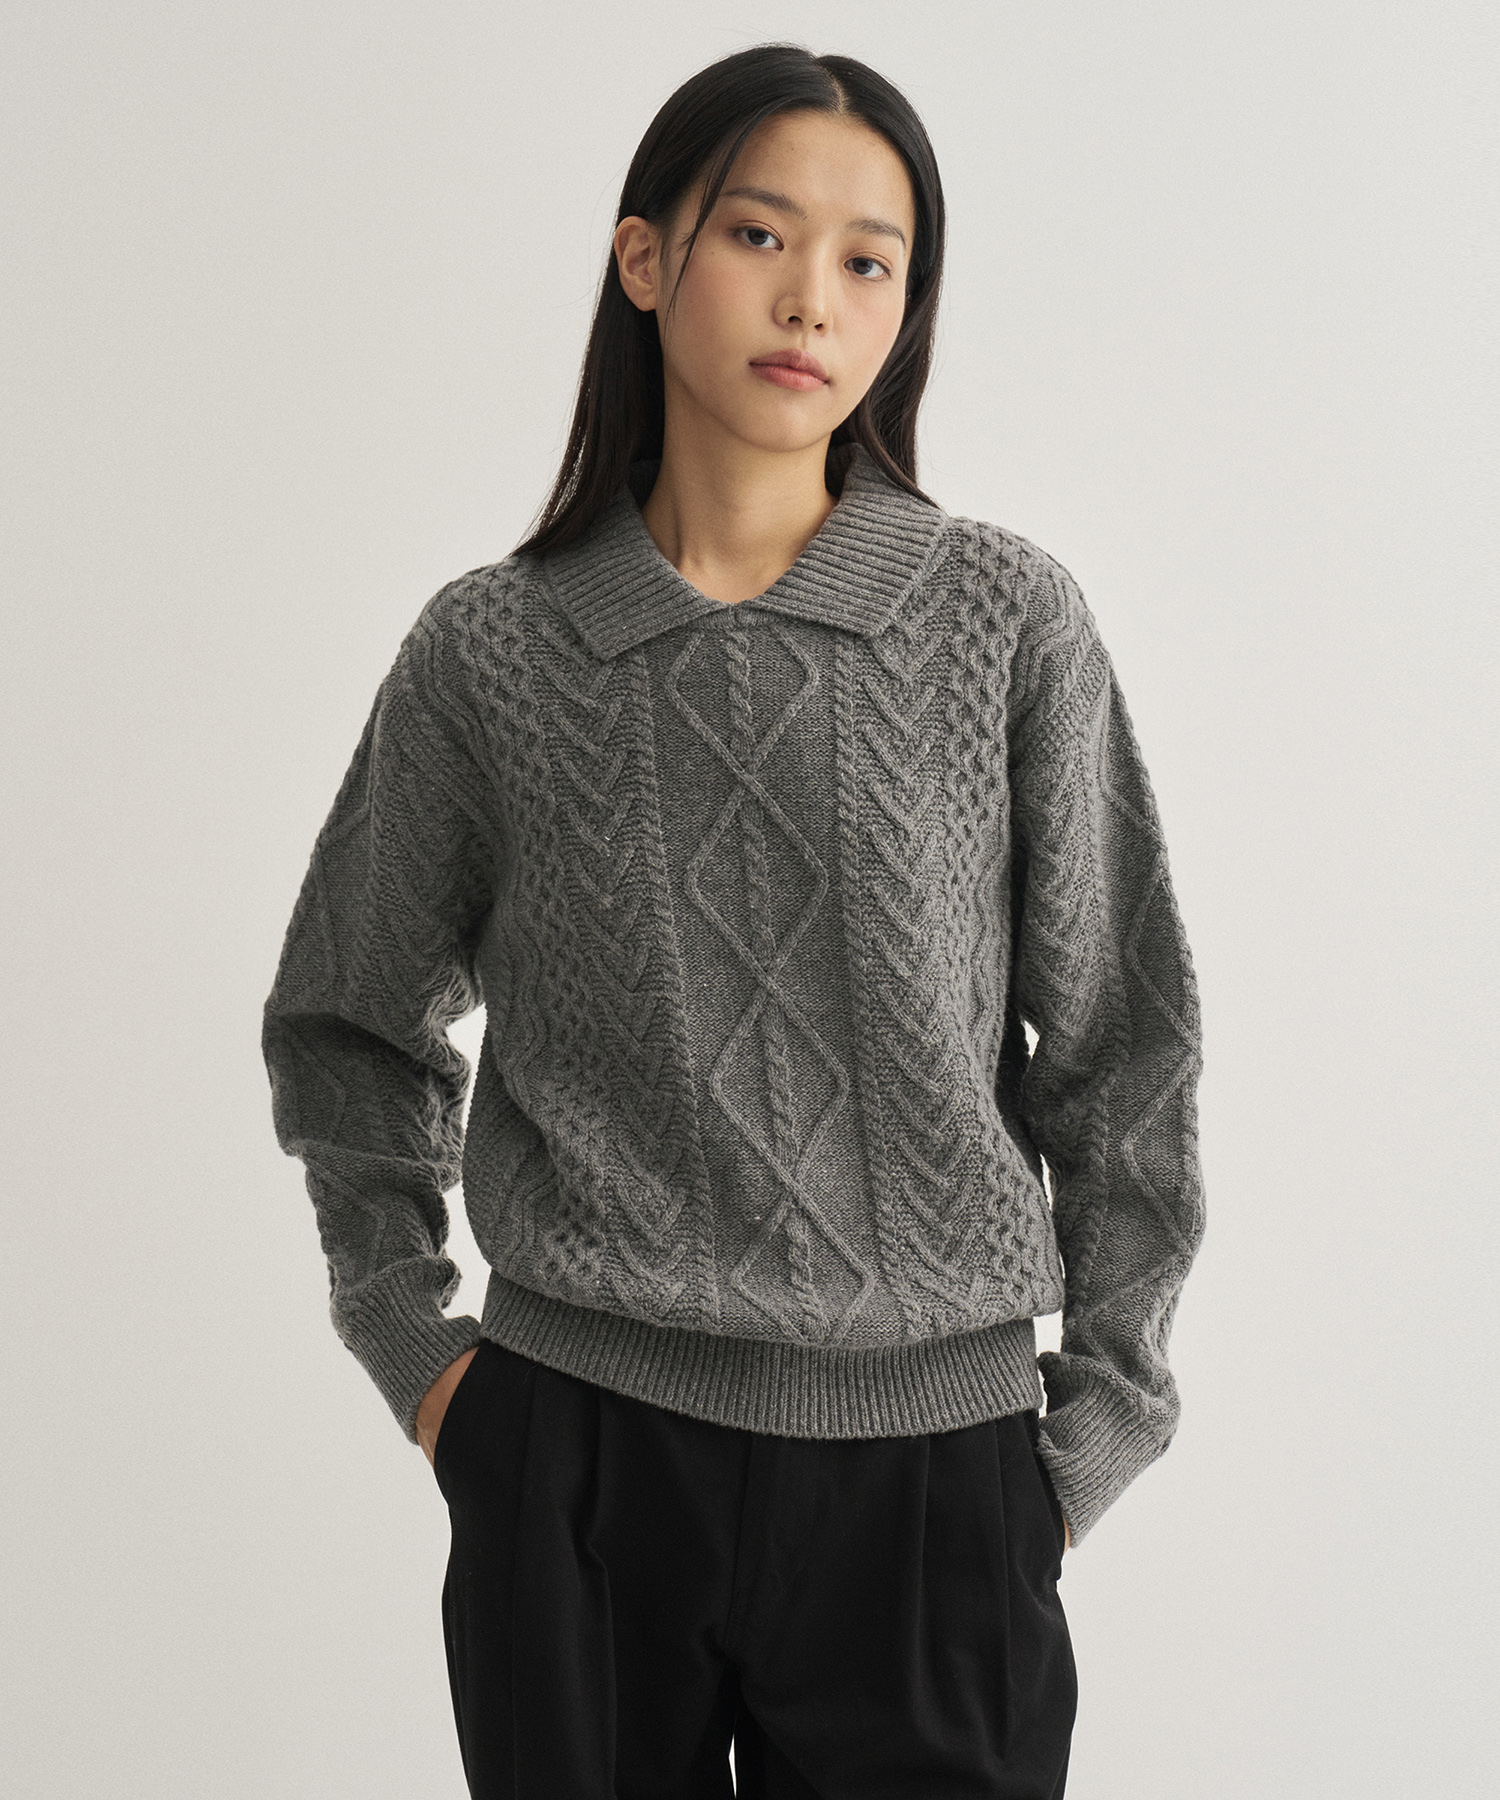 23AW Women Fisherman Cable Knit (Heather Gray)